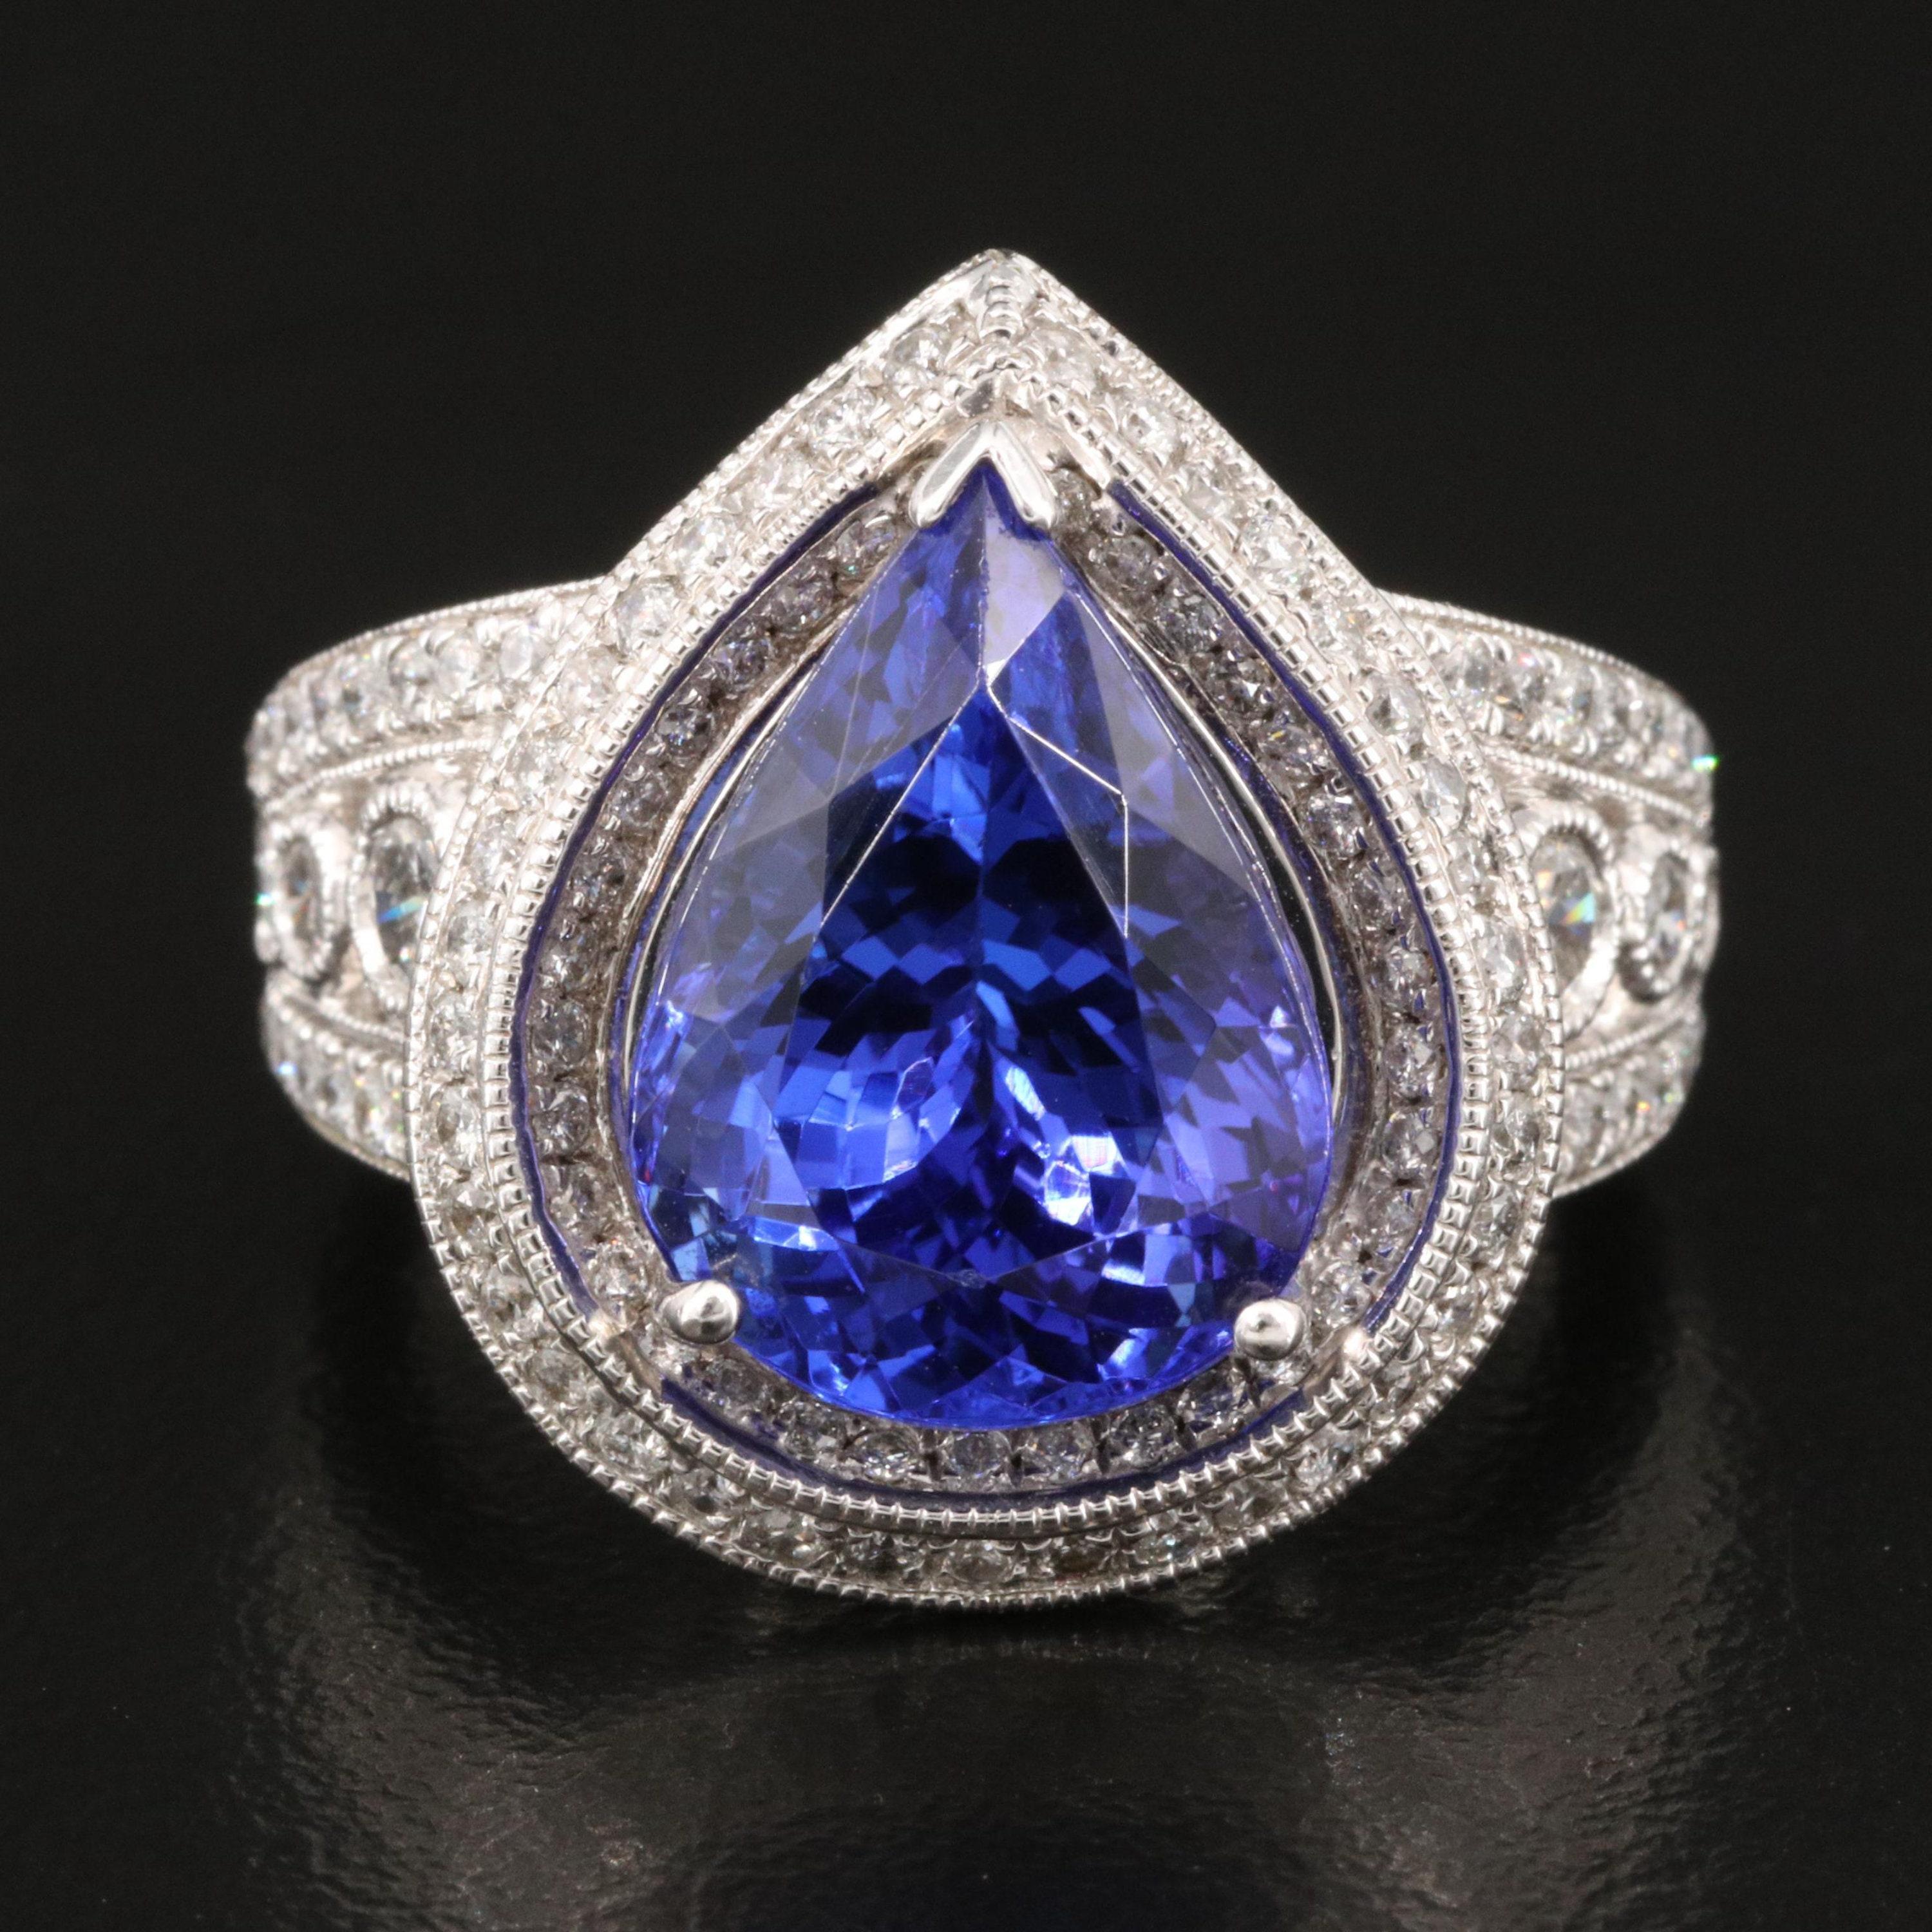 For Sale:  6.7 Carat Art Deco Pear Cut Tanzanite Engagement Ring White Gold Wedding Ring 5